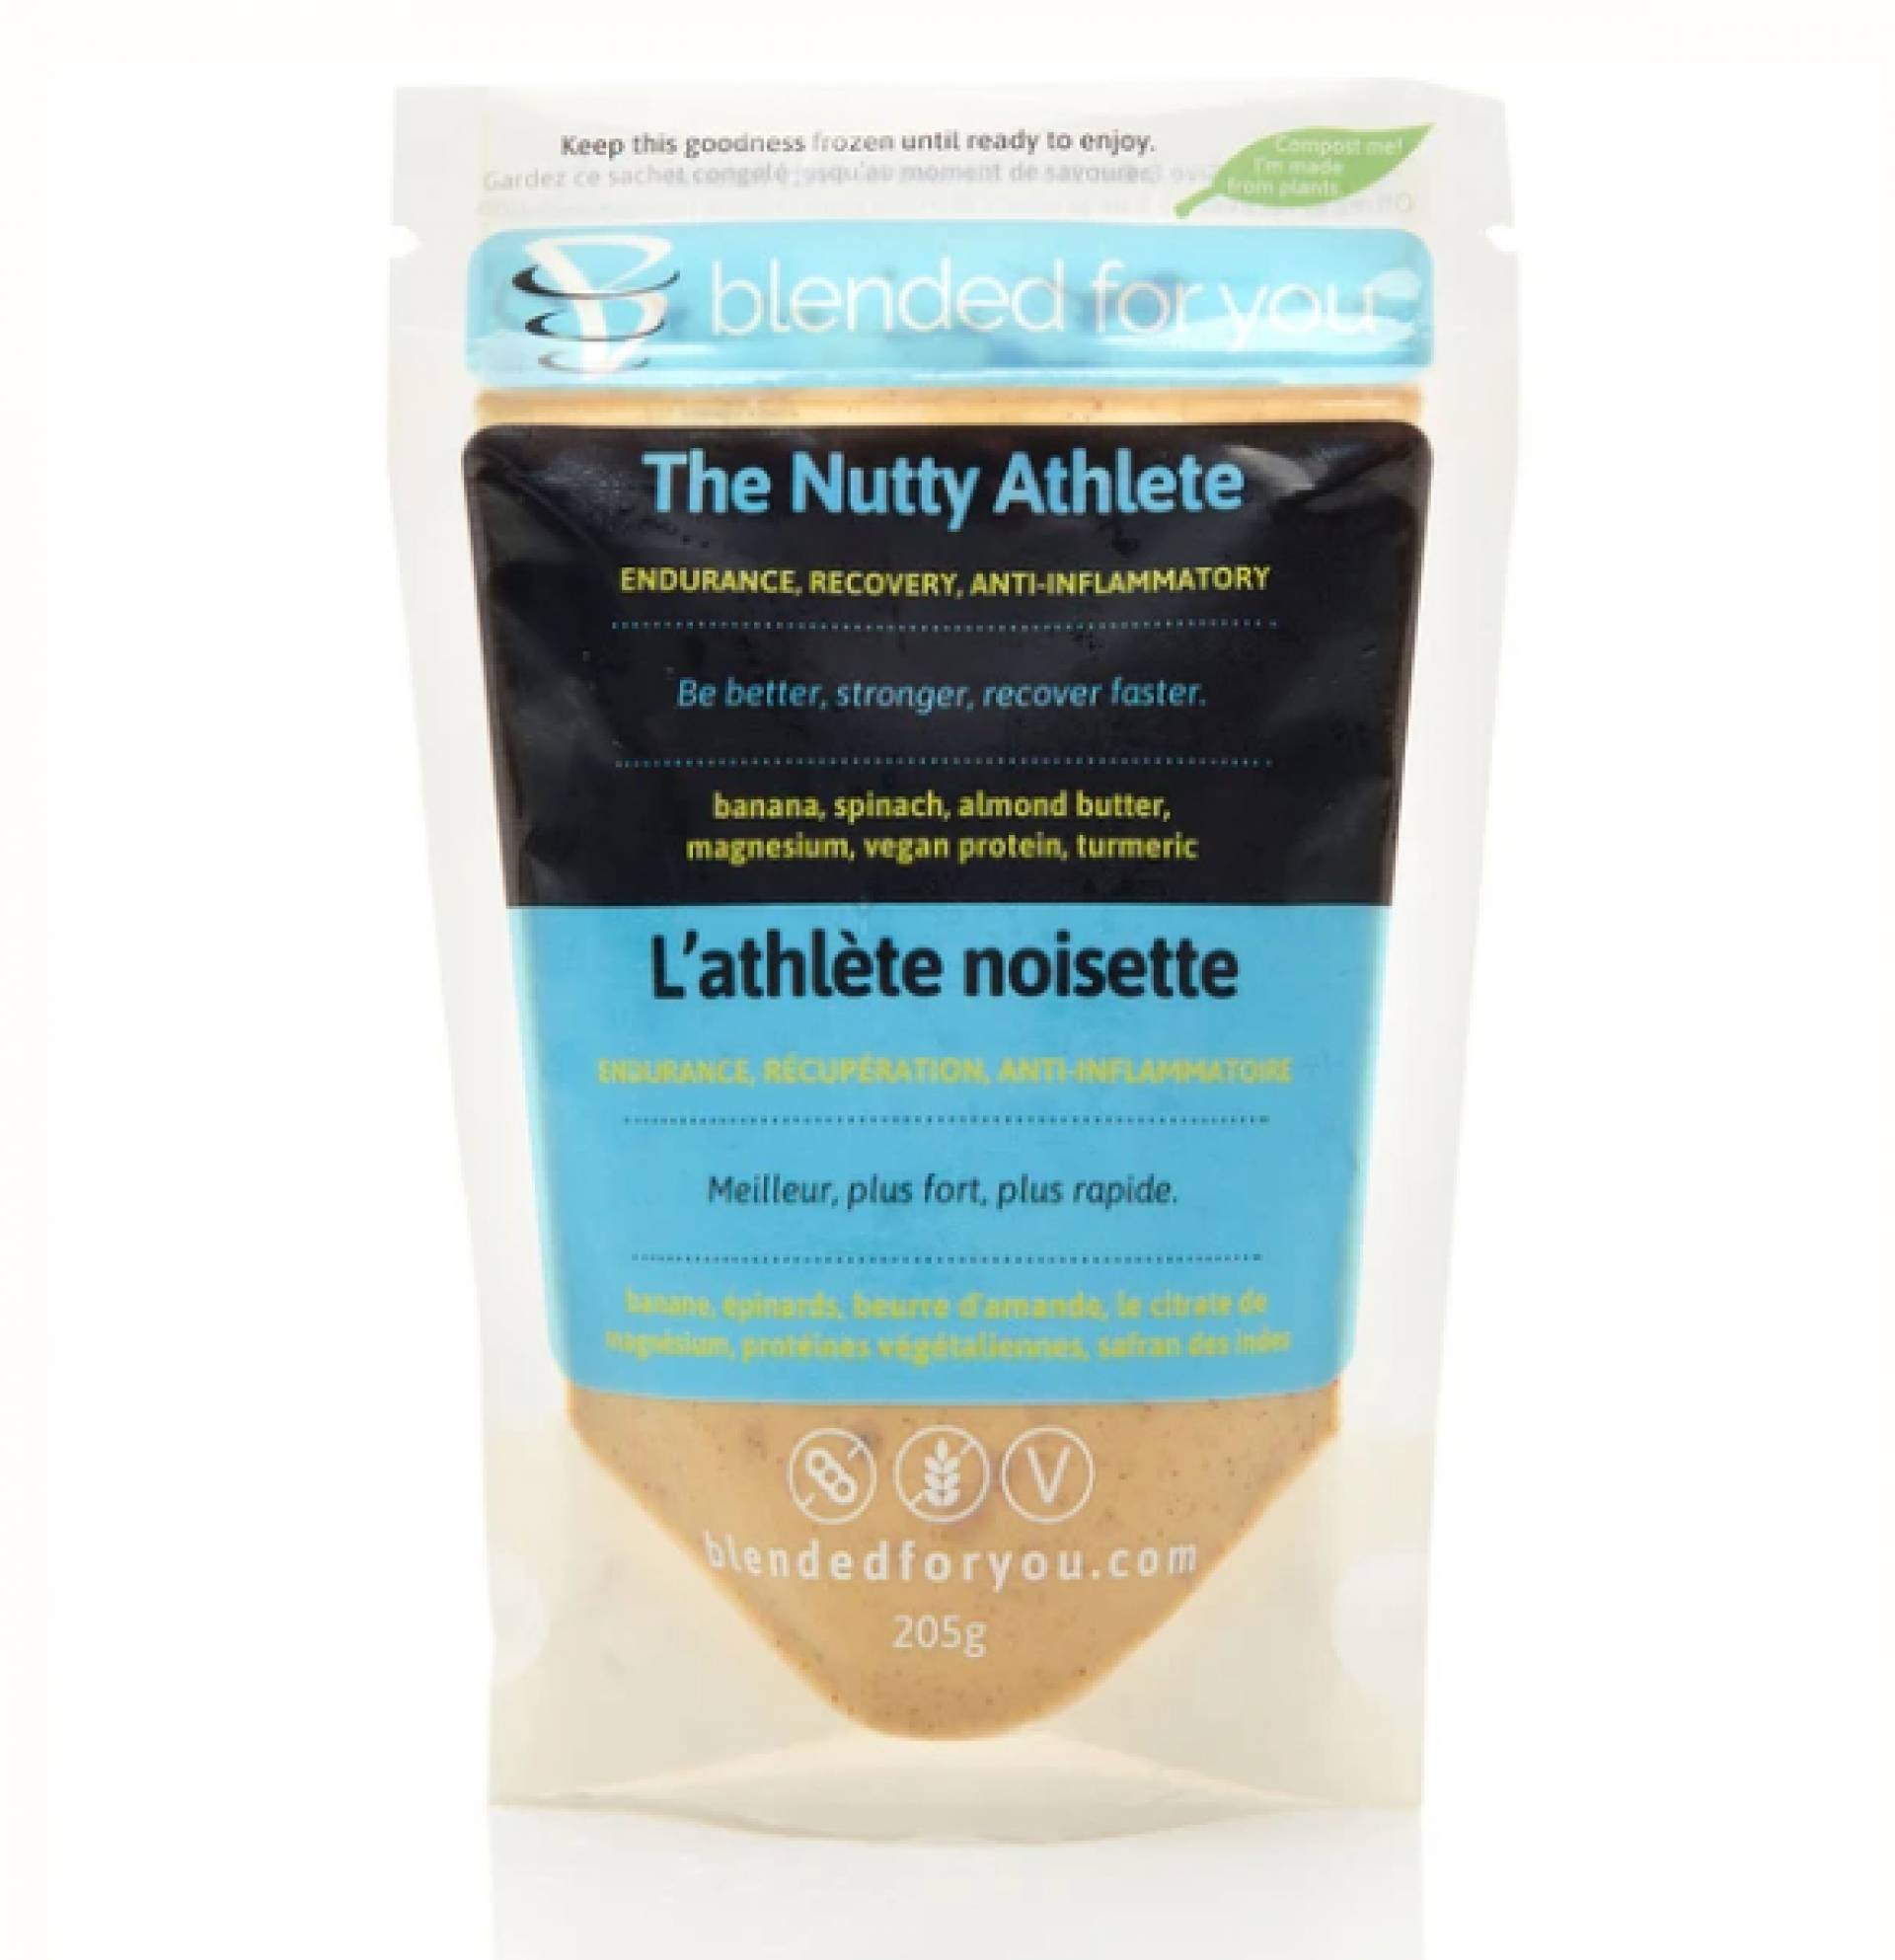 The Nutty Athlete Smoothie